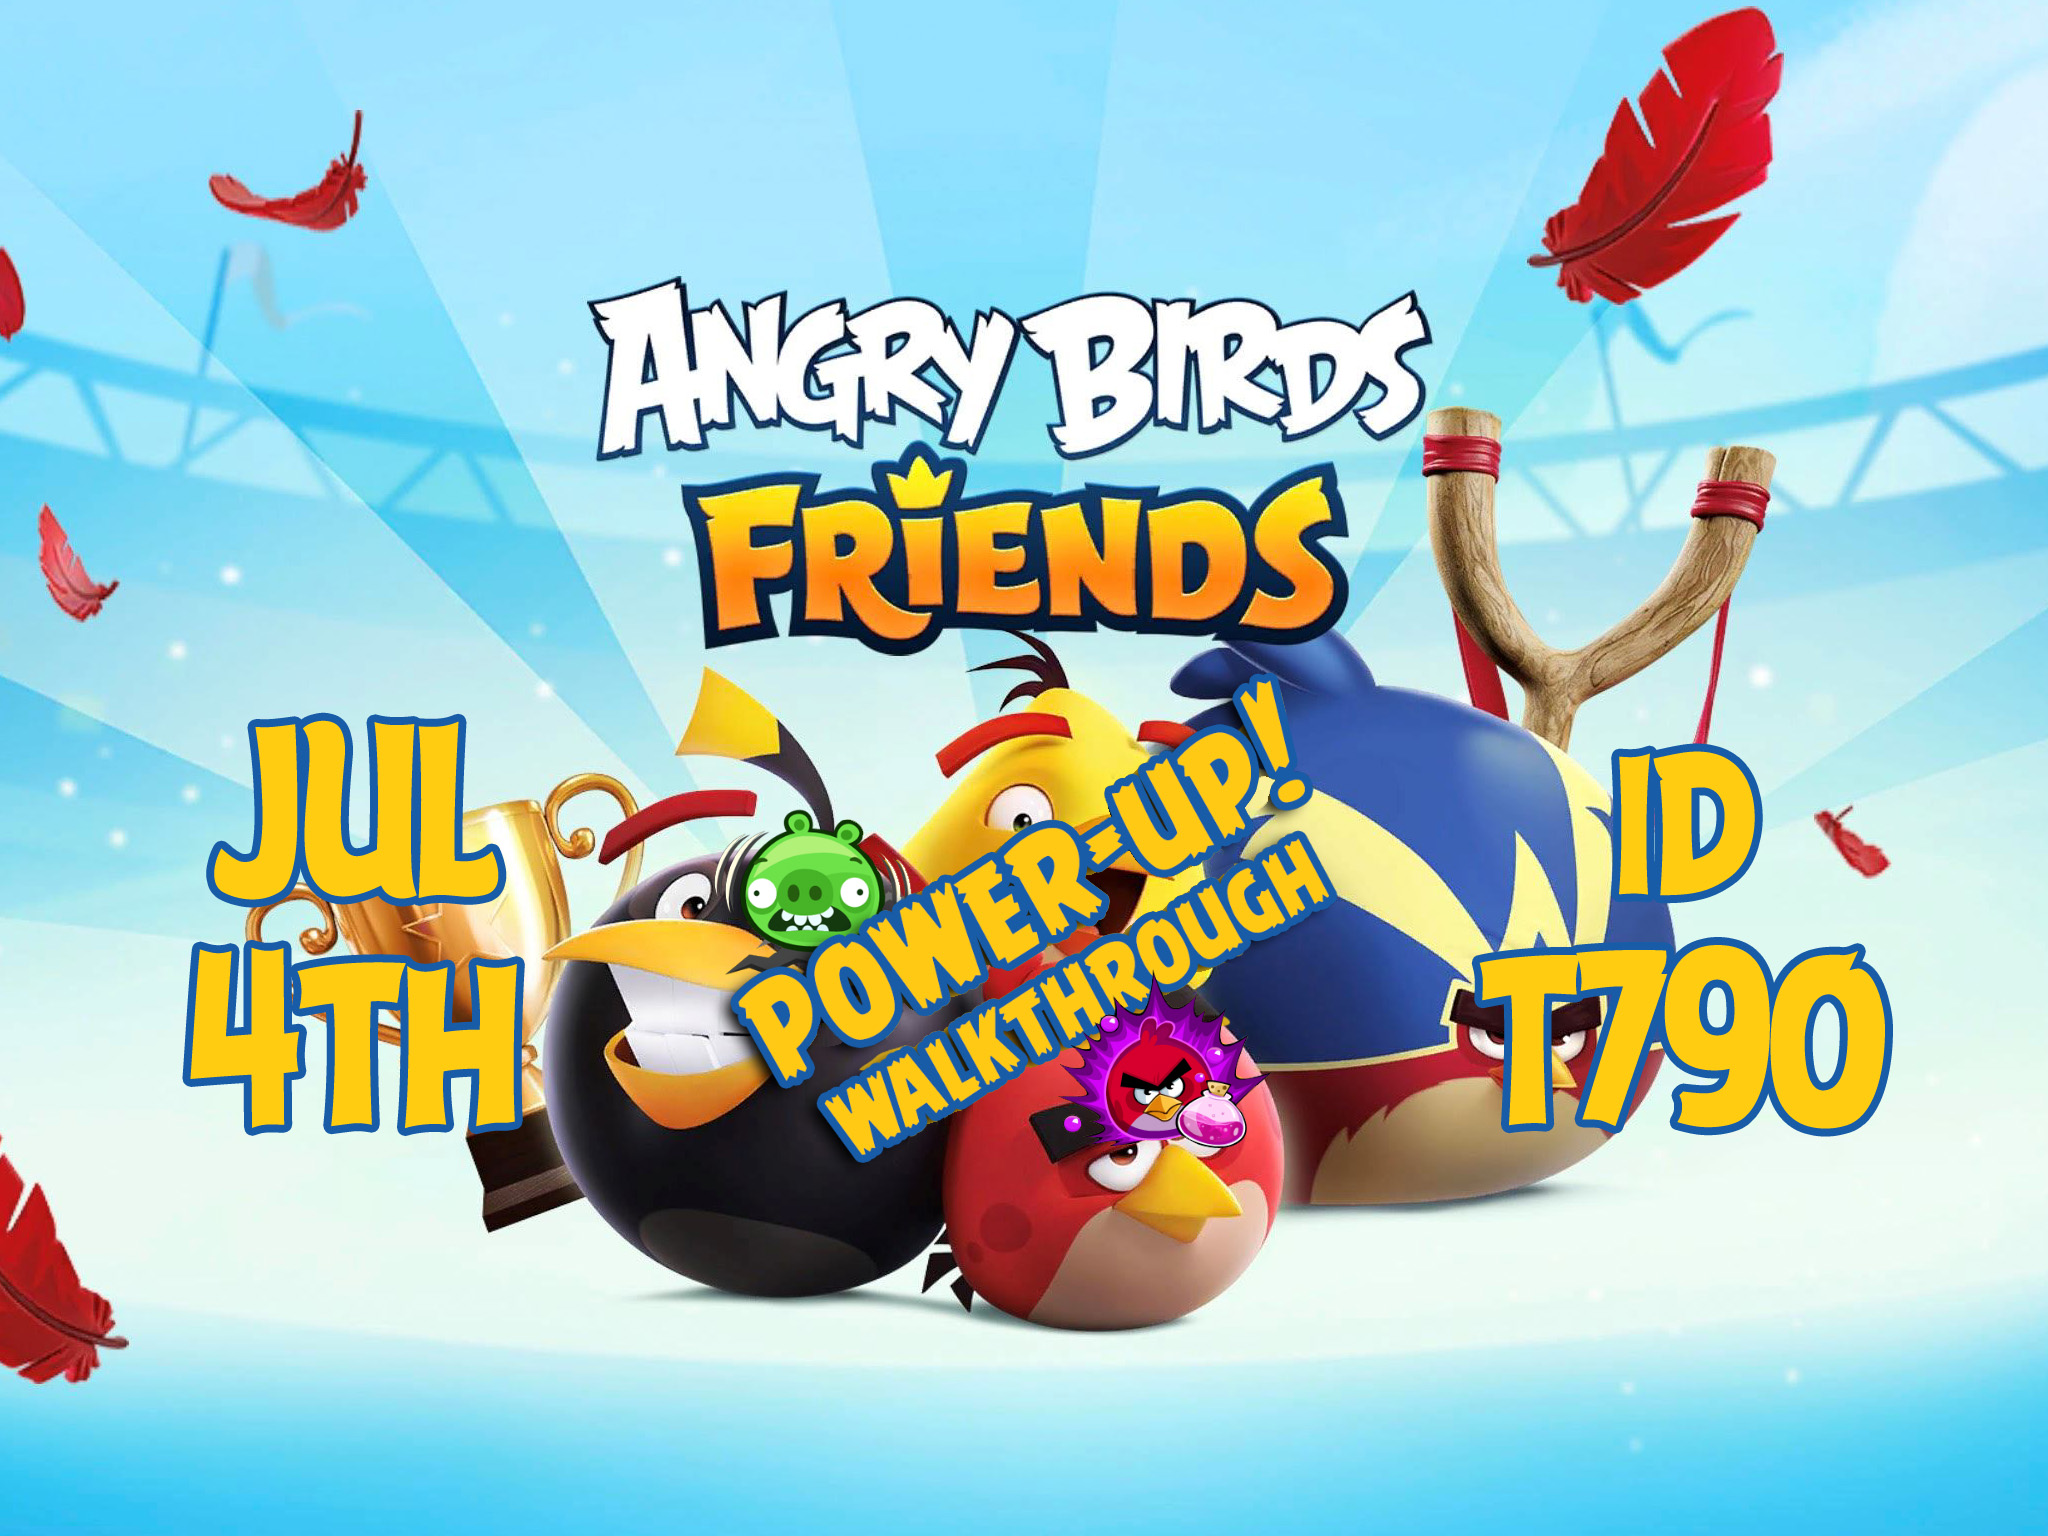 Angry-Birds-Friends-Tournament-T790-Feature-Image-PU